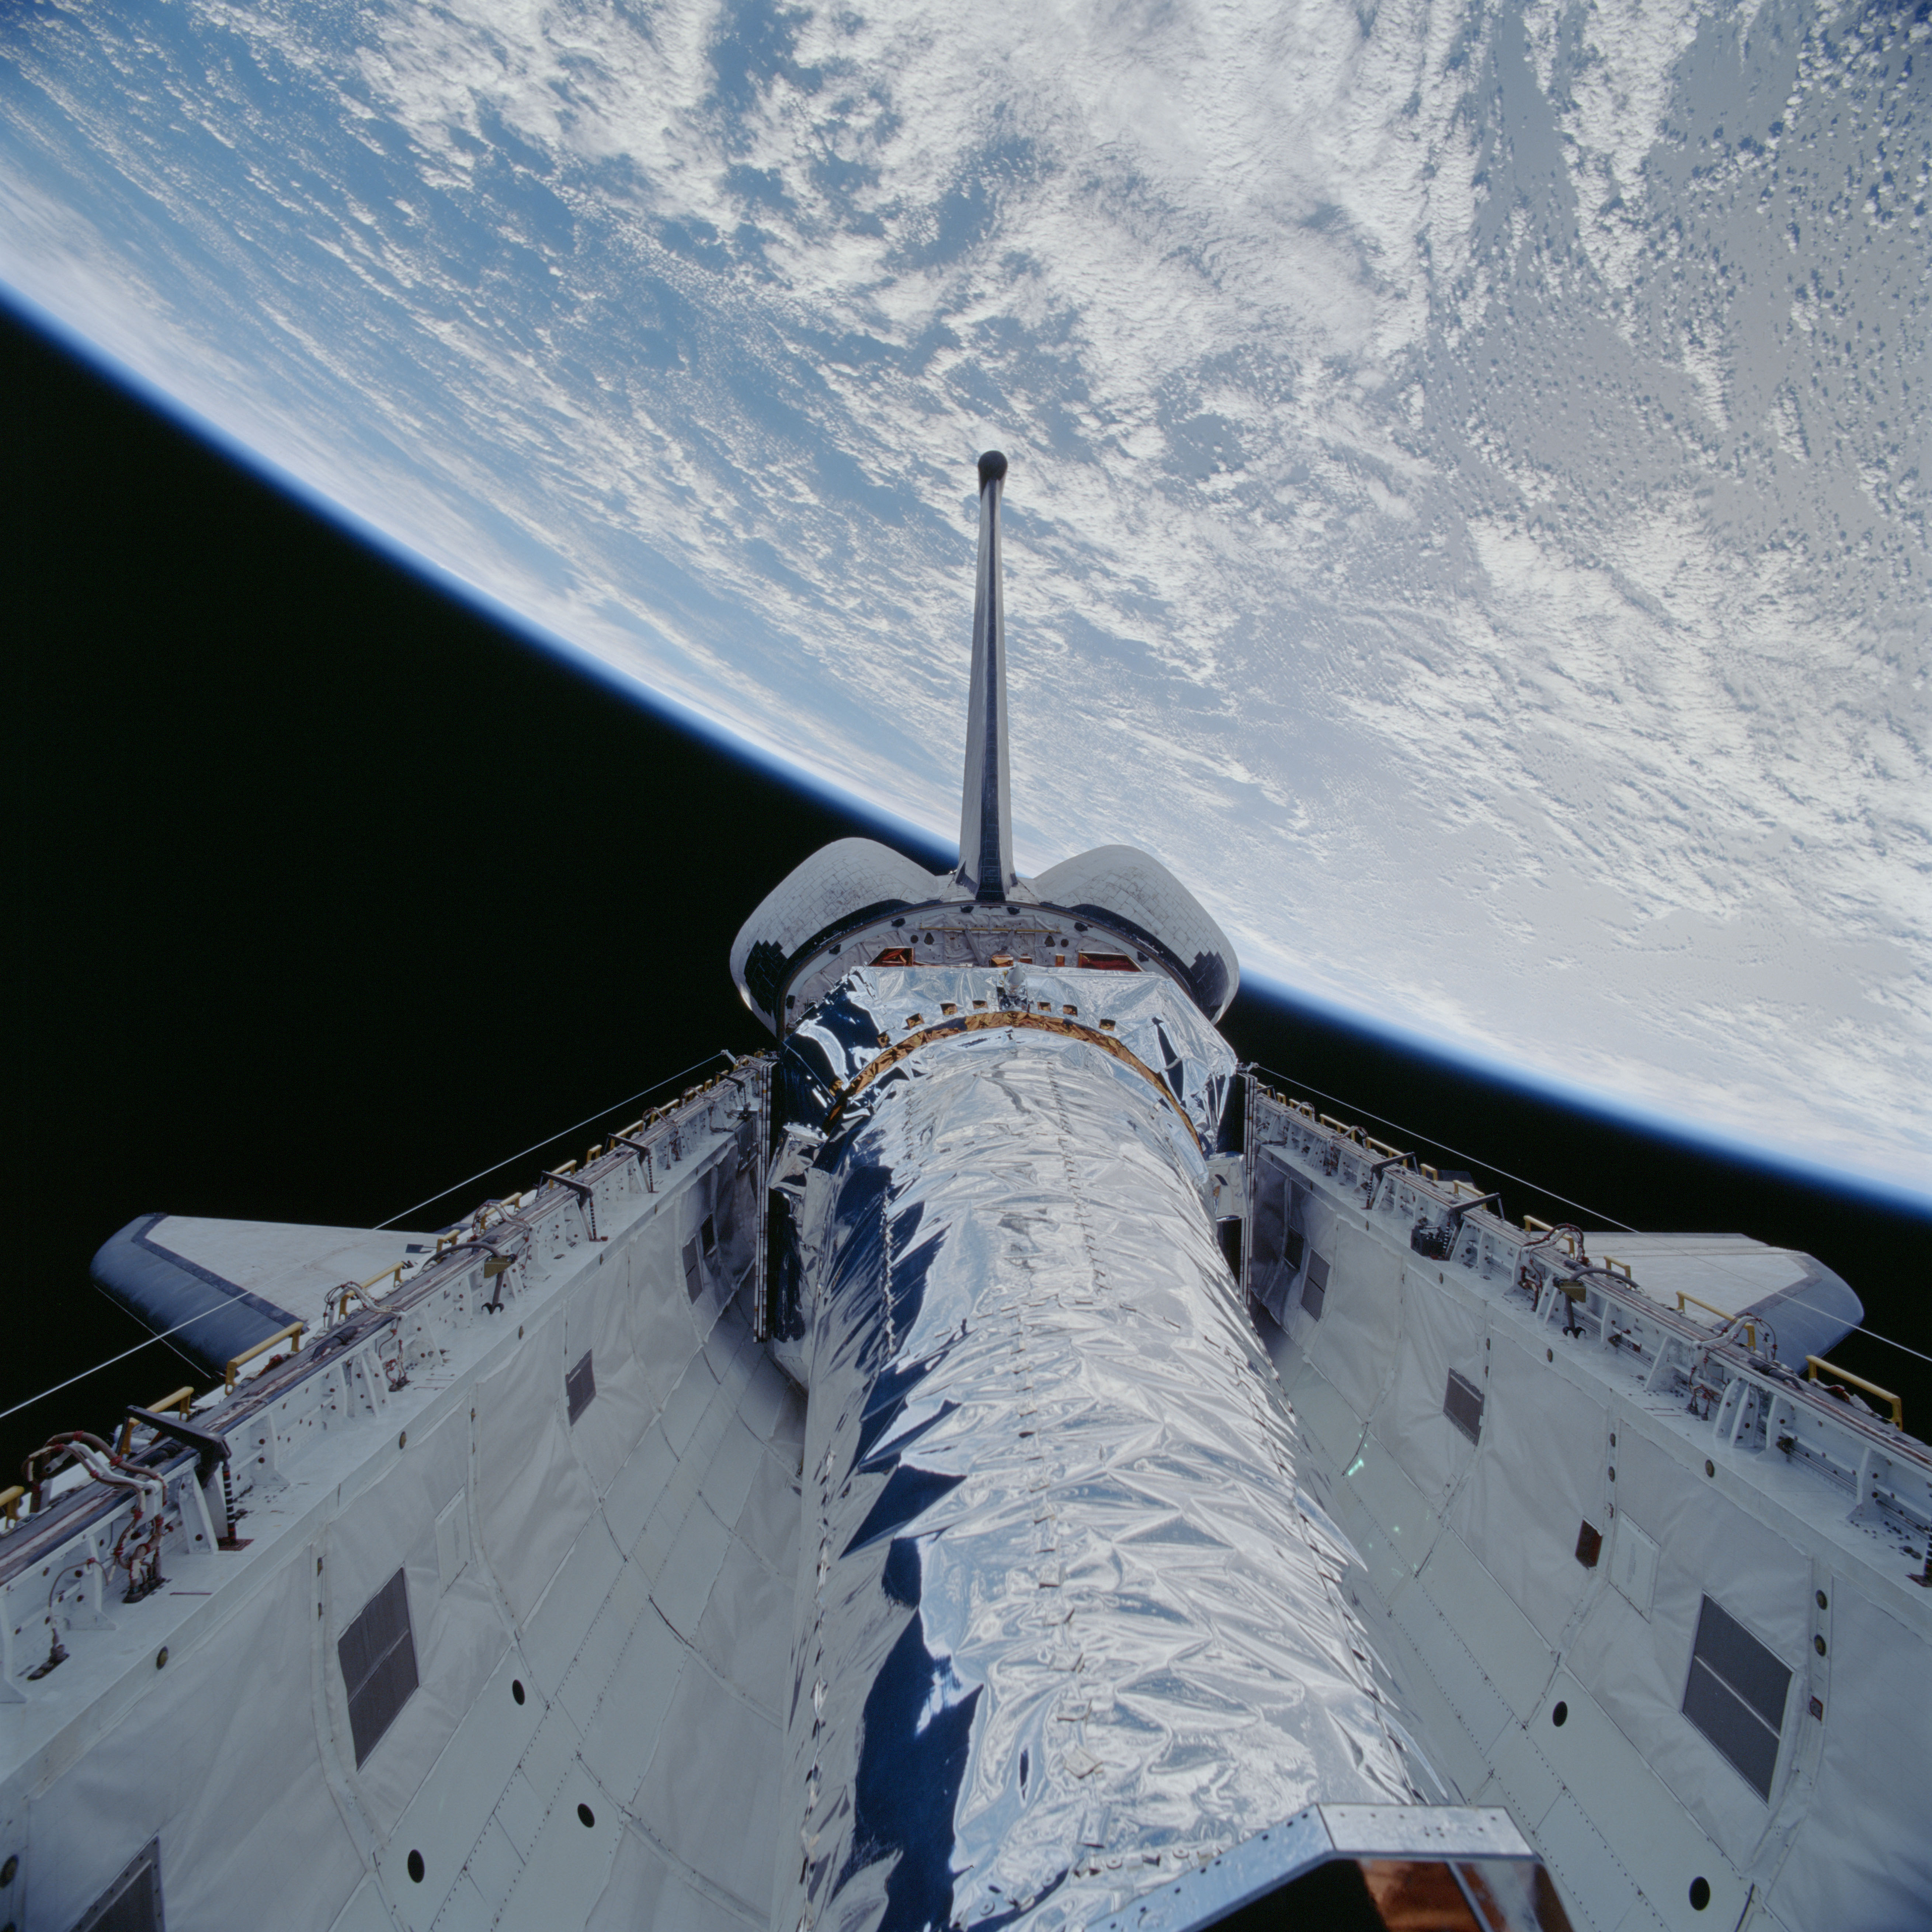 The Chandra X-ray Observatory in Columbia’s payload bay shortly after reaching orbit